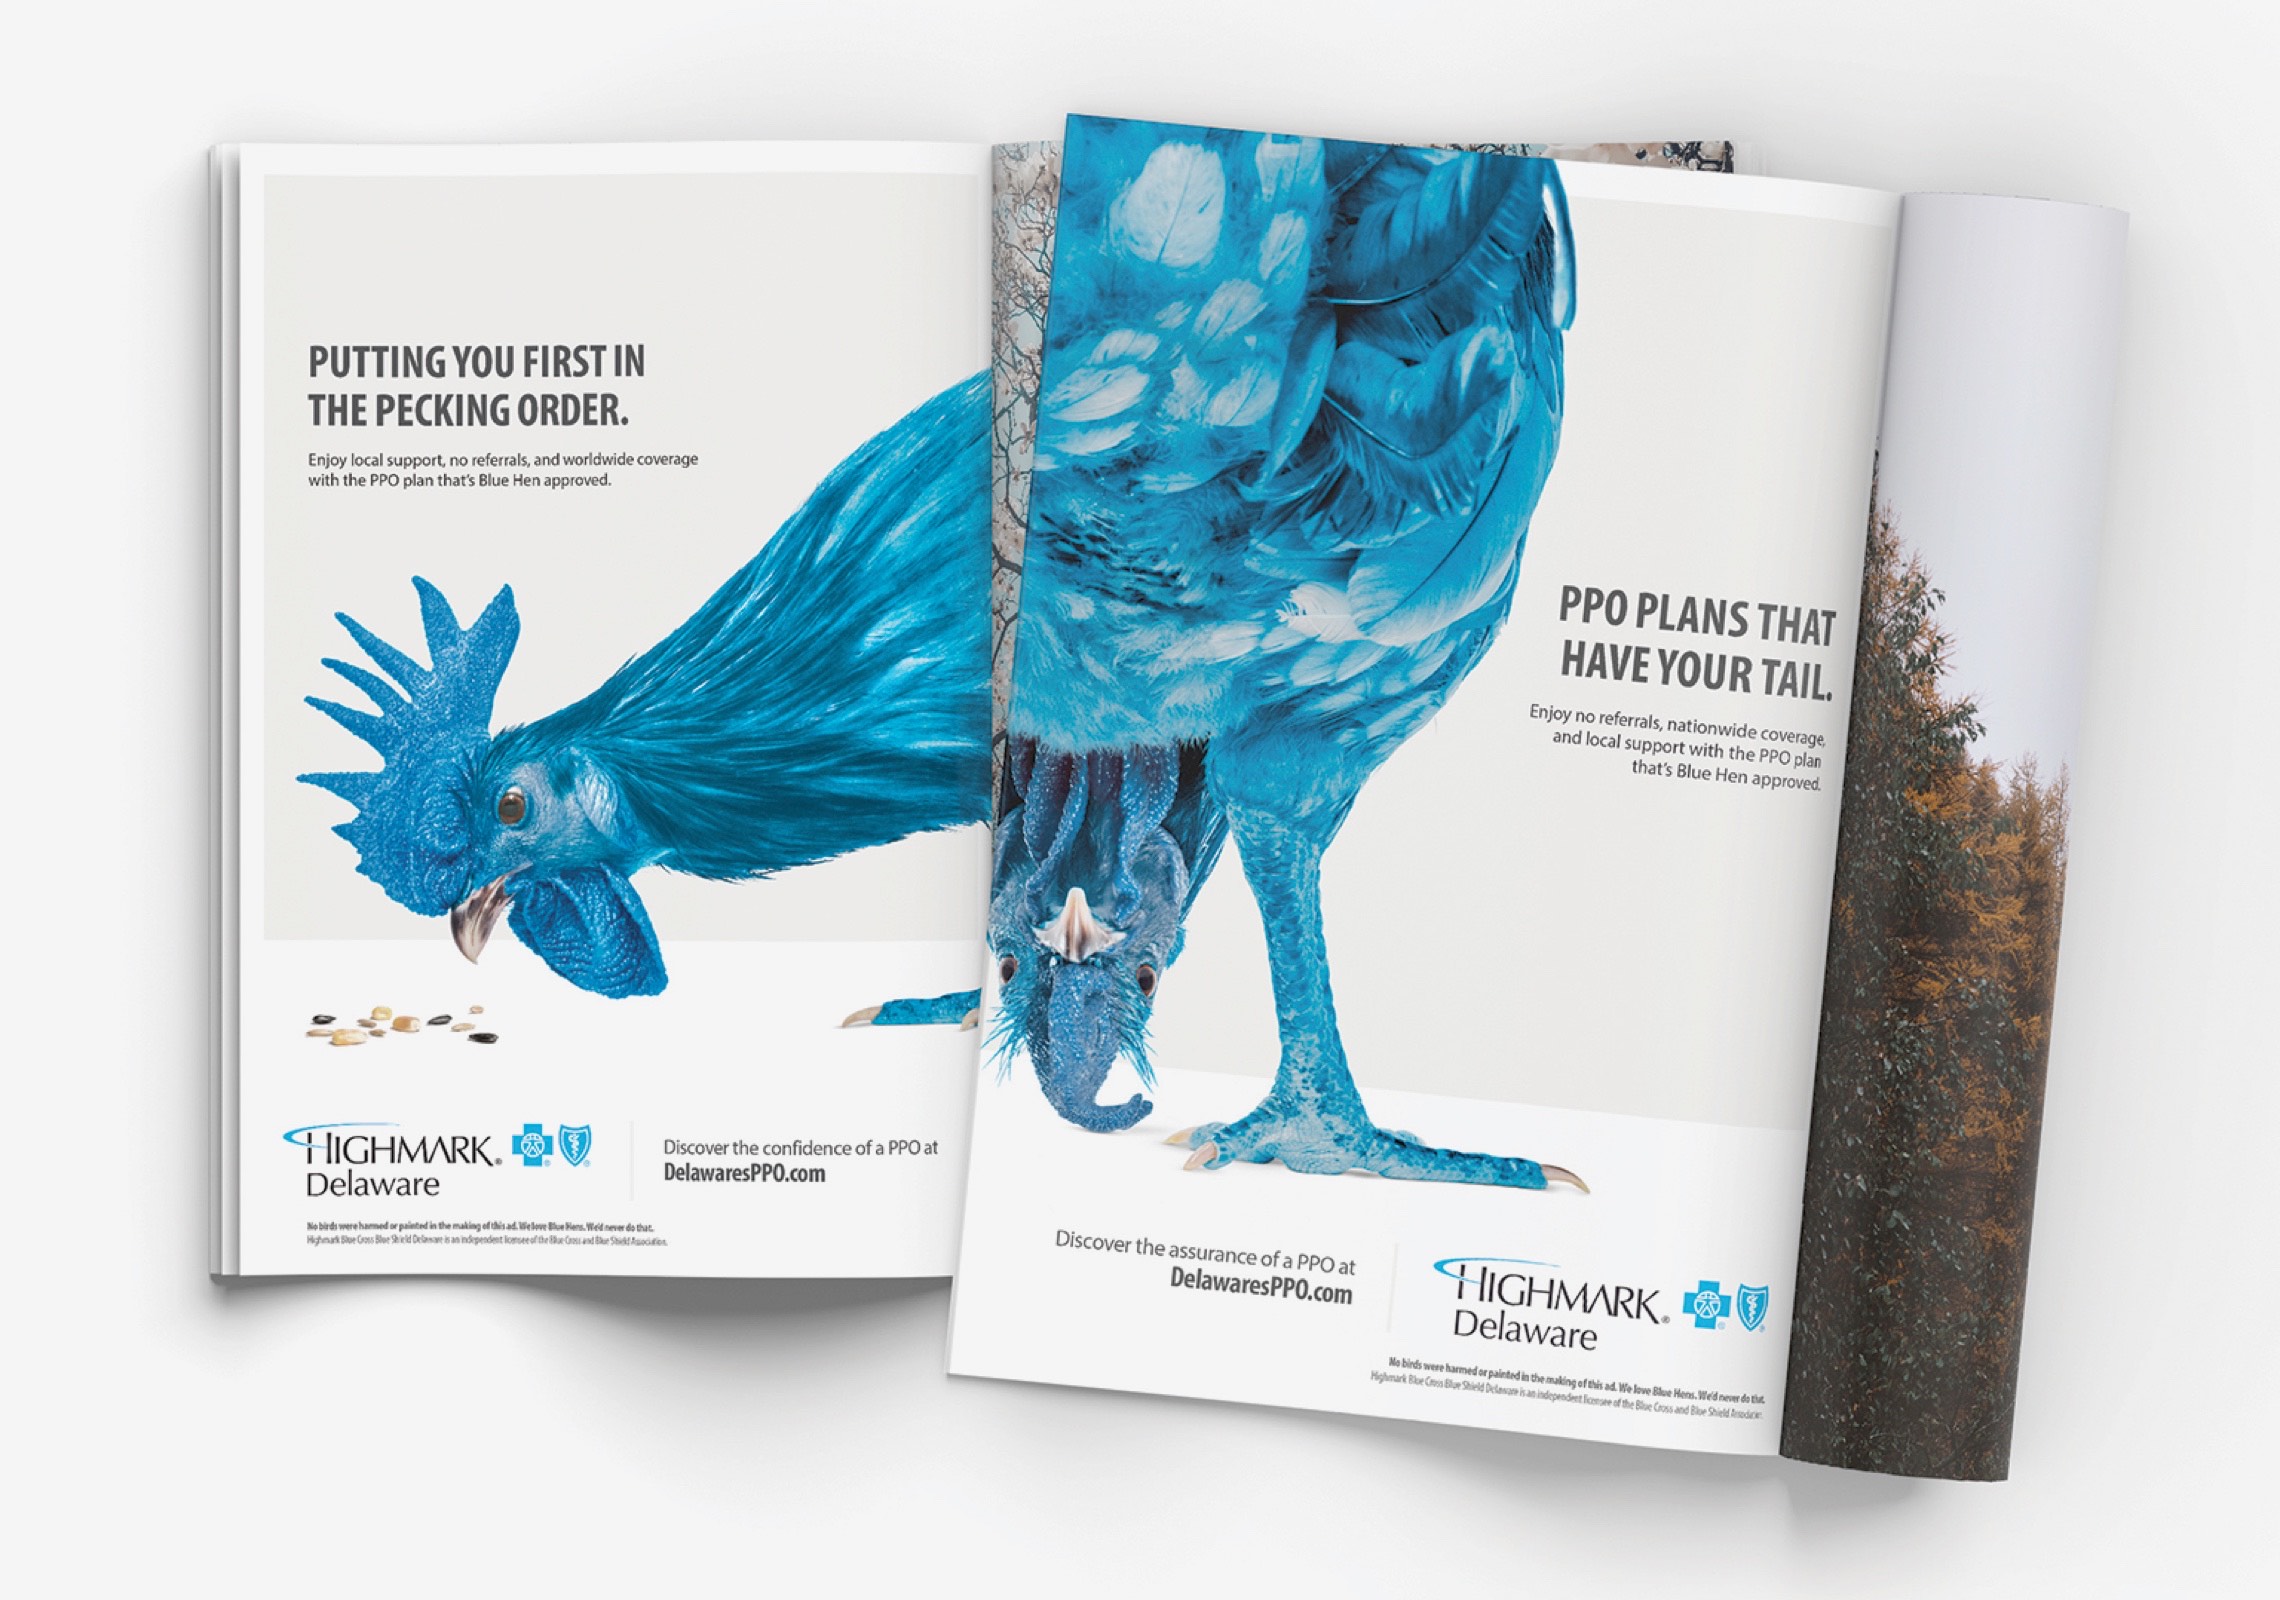 Photograph of two blue hen advertisements in magazines.